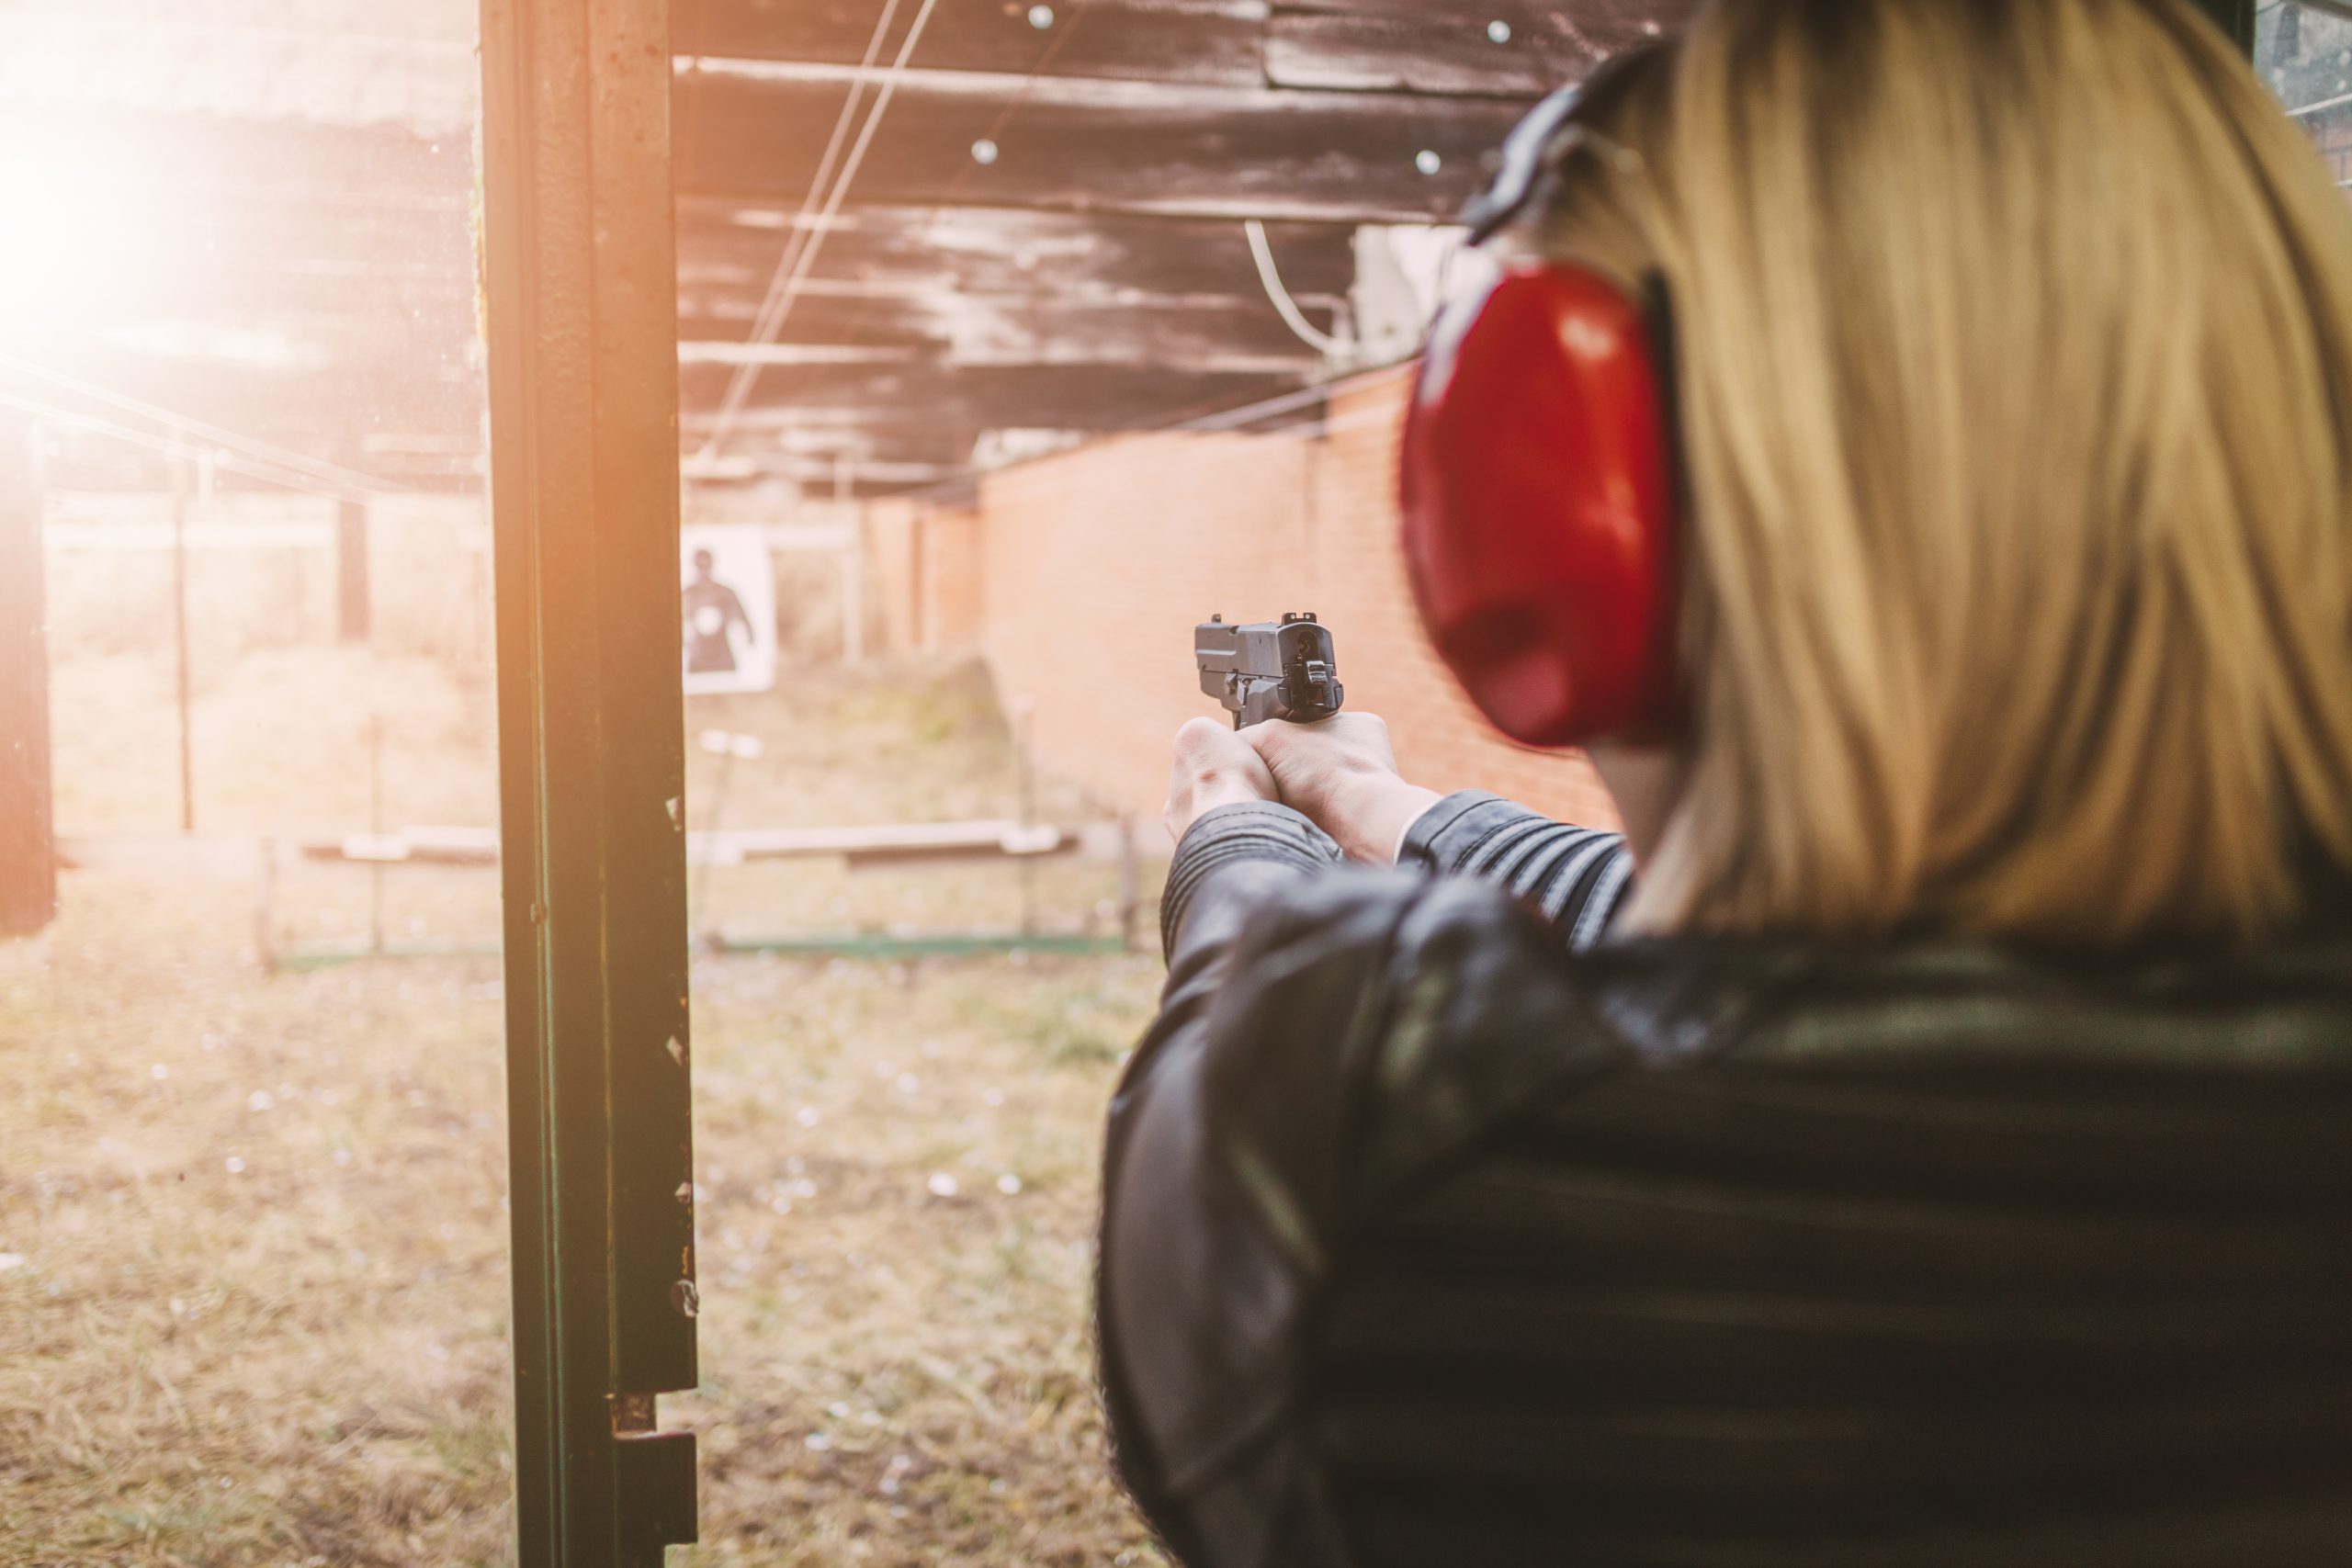 A person wearing ear protection while shooting a handgun at an outdoor range.